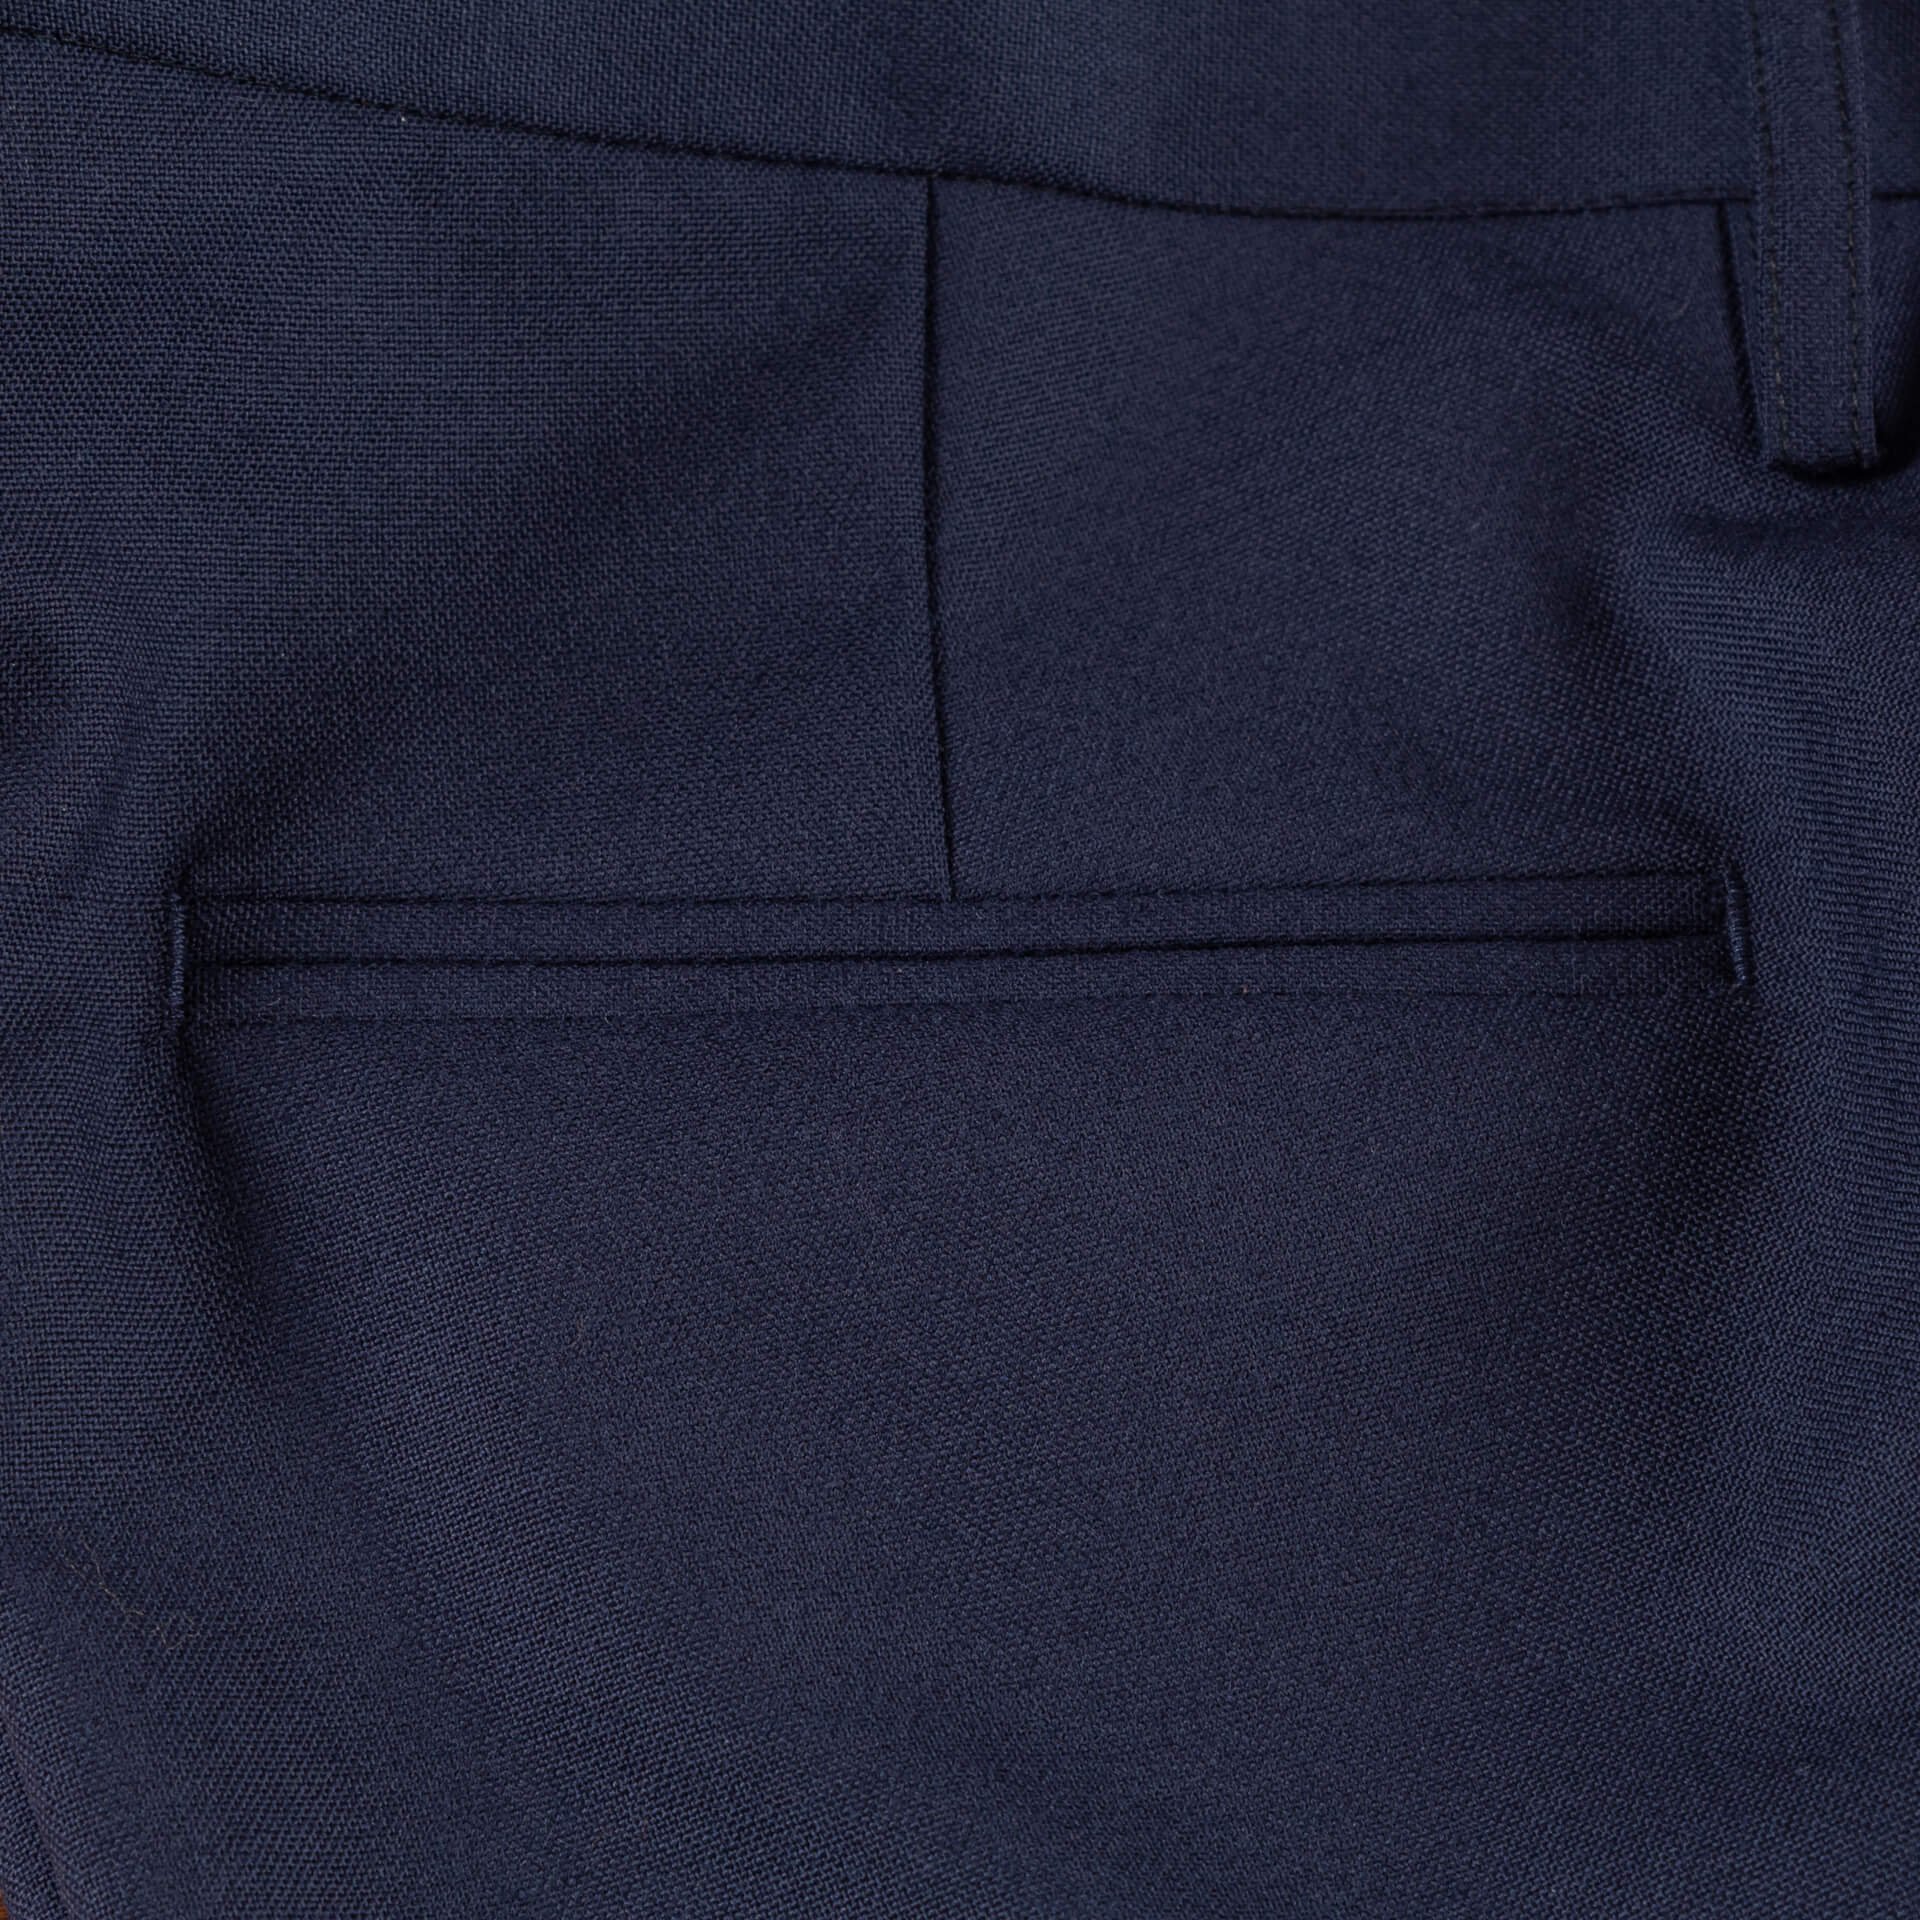 Trousers Navy Solid Worsted Wool 280 gms Crispare Holland &amp; Sherry